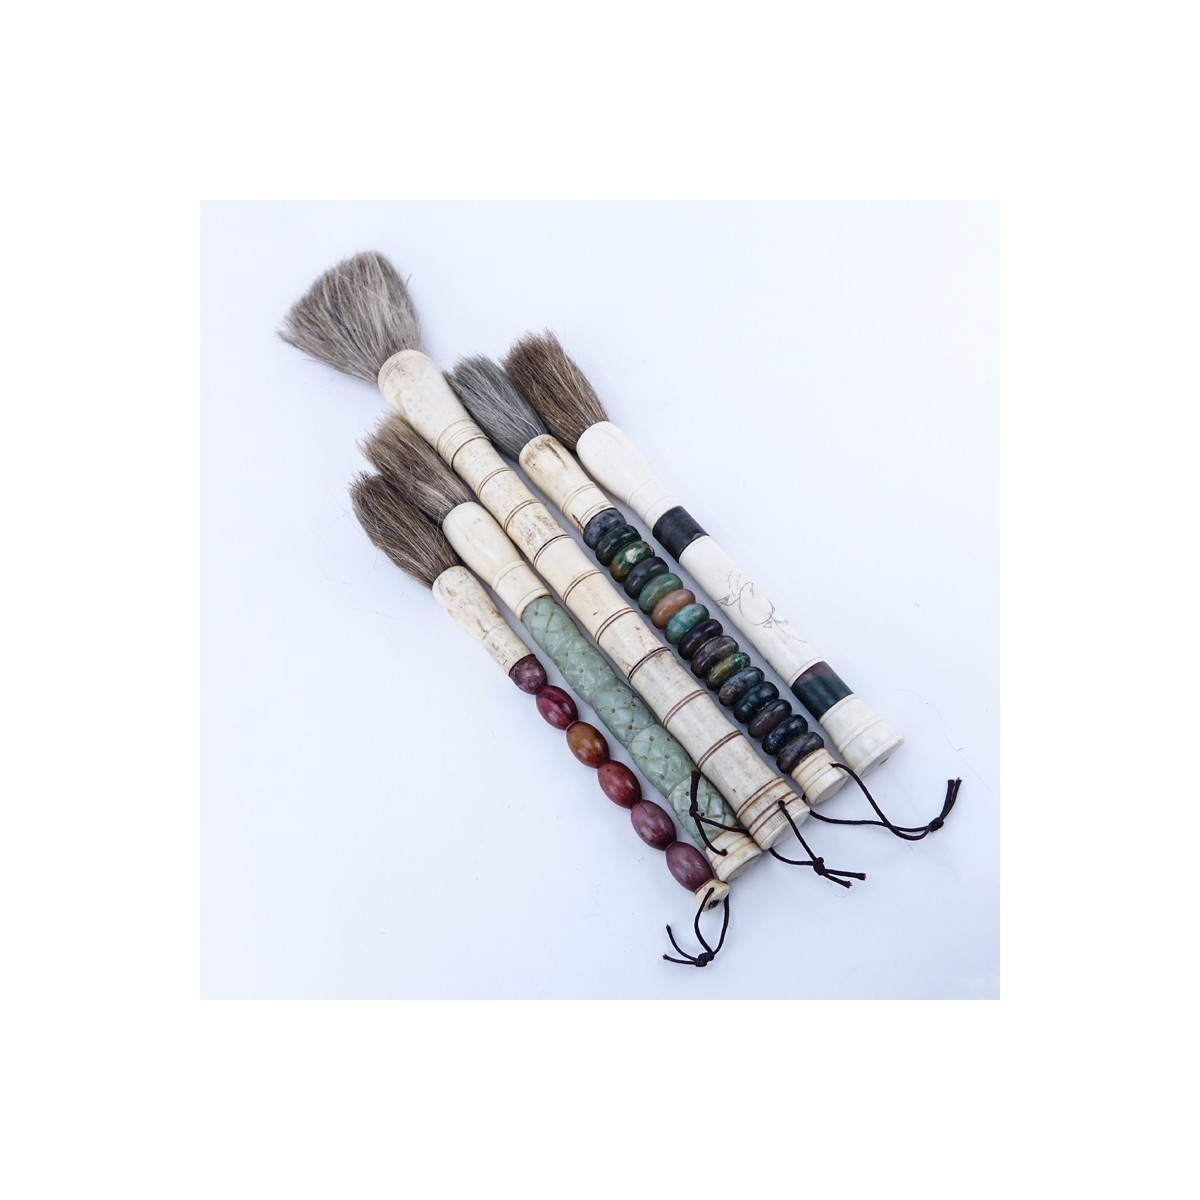 Grouping of Five (5) Antique Chinese Calligraphy Brushes with Bone, Jade, or Carnelian as Handles. Good condition.